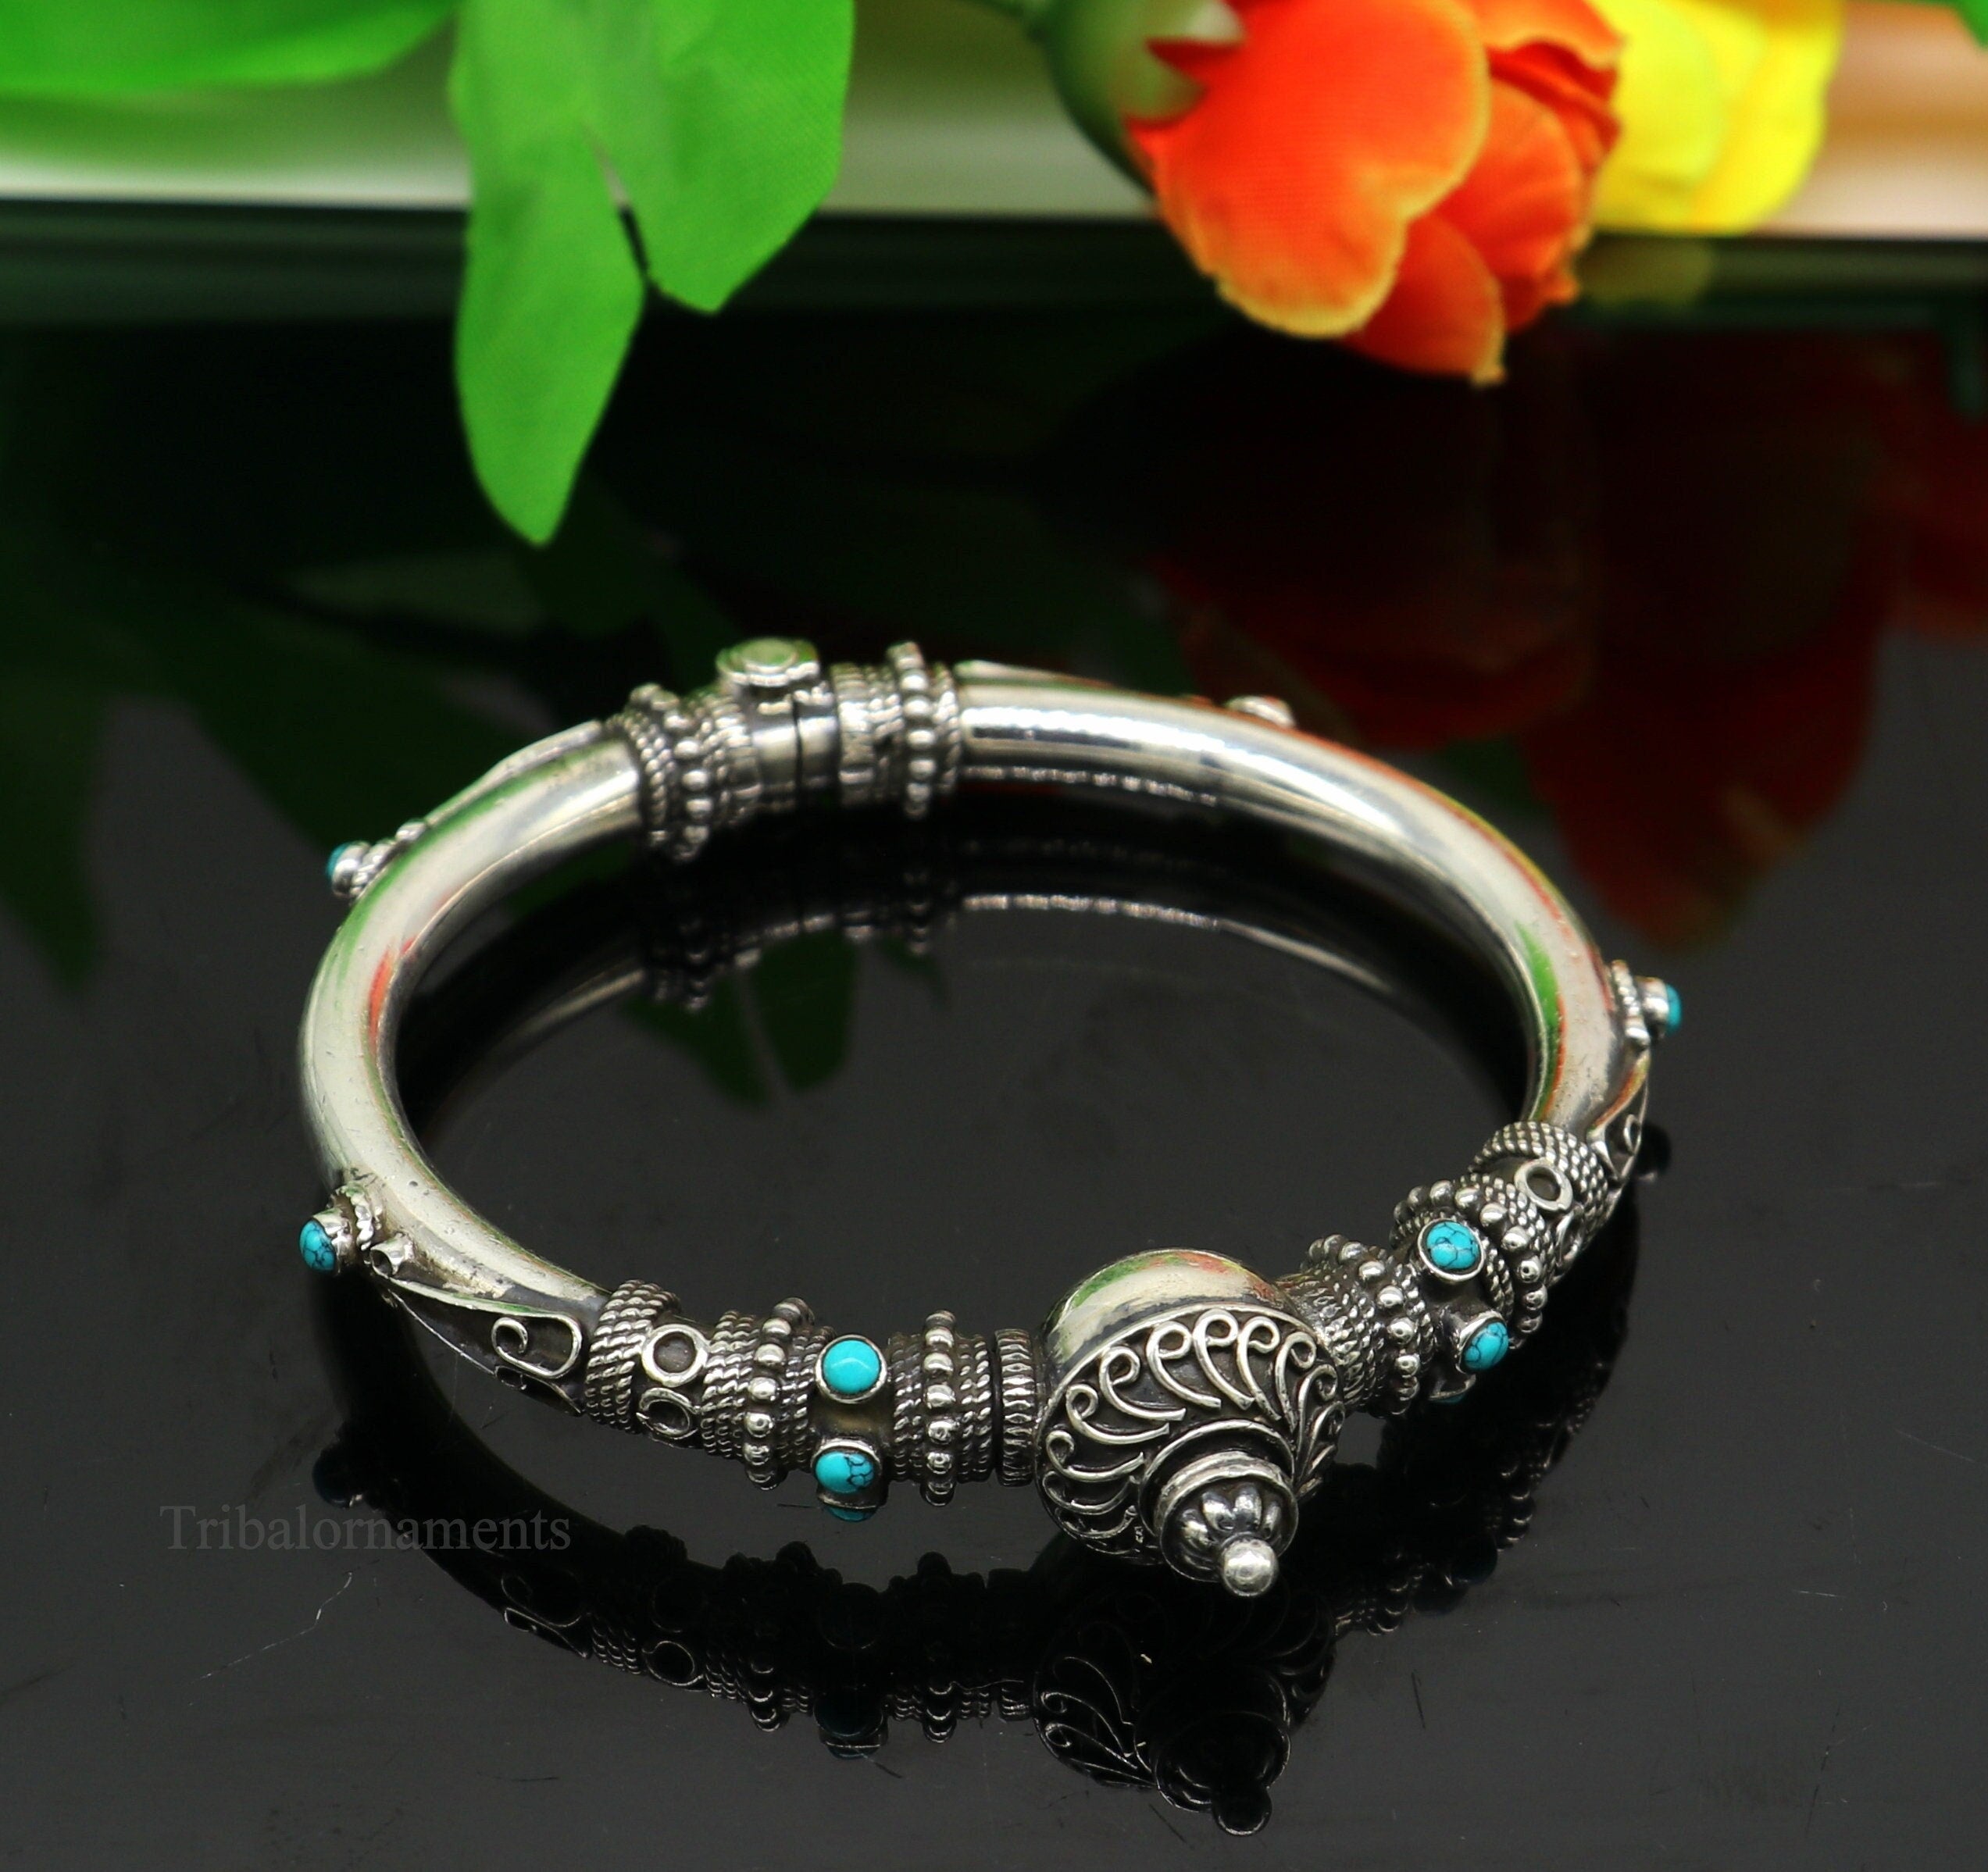 925 sterling silver handmade unique cultural design trendy kada bracelet  for mens and girls best delicate Light weight jewelry nsk667  TRIBAL  ORNAMENTS